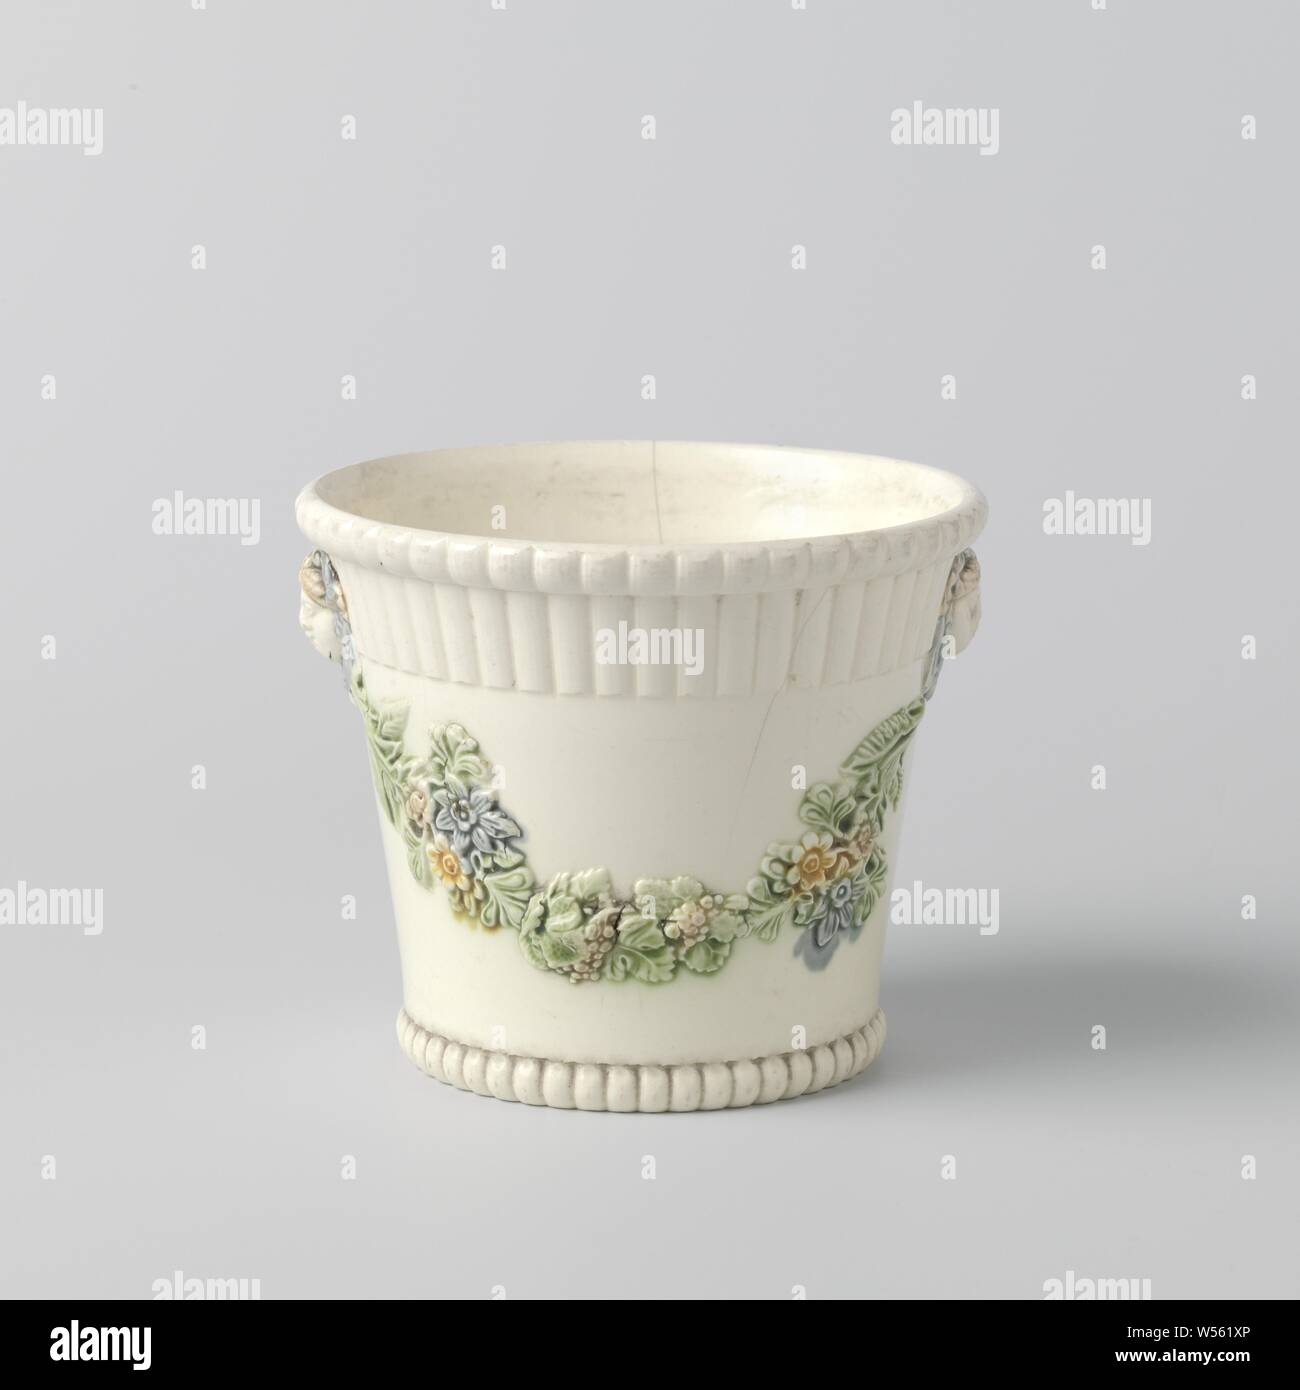 Flowerpot made from hard-fired earthenware, with a multicolored decoration, Wedgwood, Cup-shaped flowerpot made from hard-fired earthenware. The top and bottom edges are ribbed. The pot is decorated with multicolored festoons and embossed masks. The pot is unnoticed., England, c. 1780 - c. 1810, earthenware, h 10.9 cm × d 12.0 cm d 9.3 cm Stock Photo